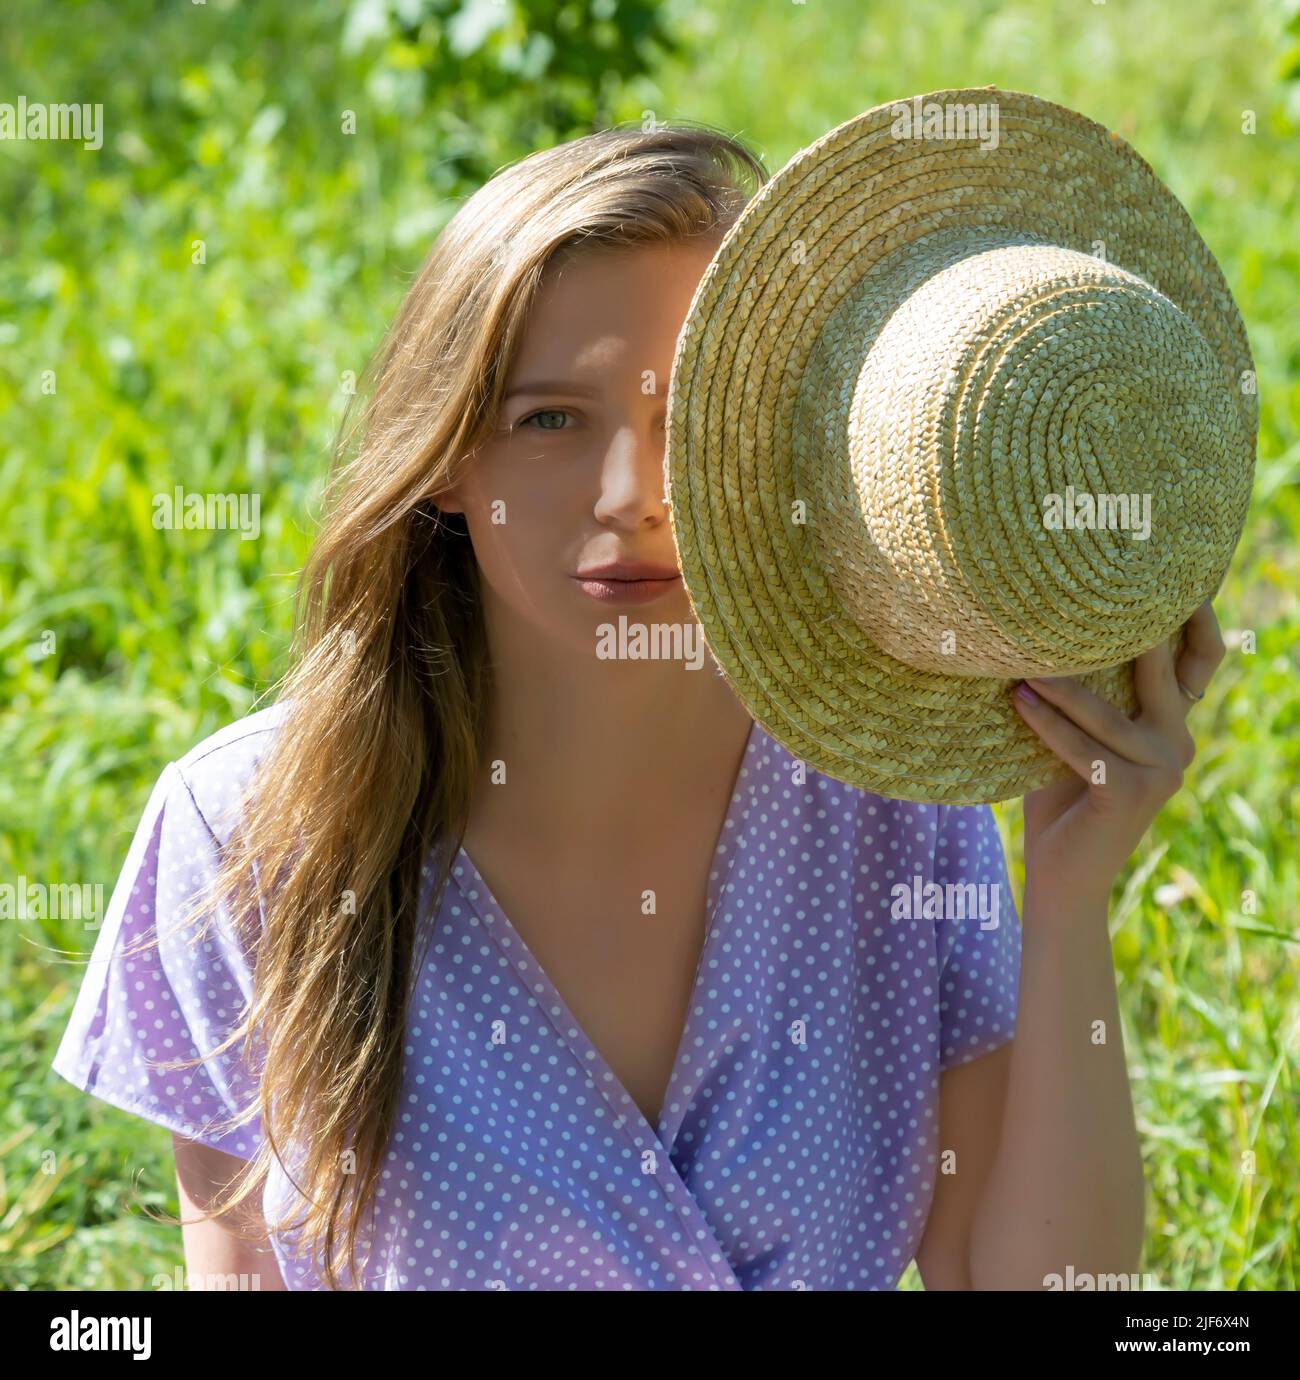 Portrait of a girl in a purple dress covering half of her face with a straw hat and looking at the camera. Stock Photo